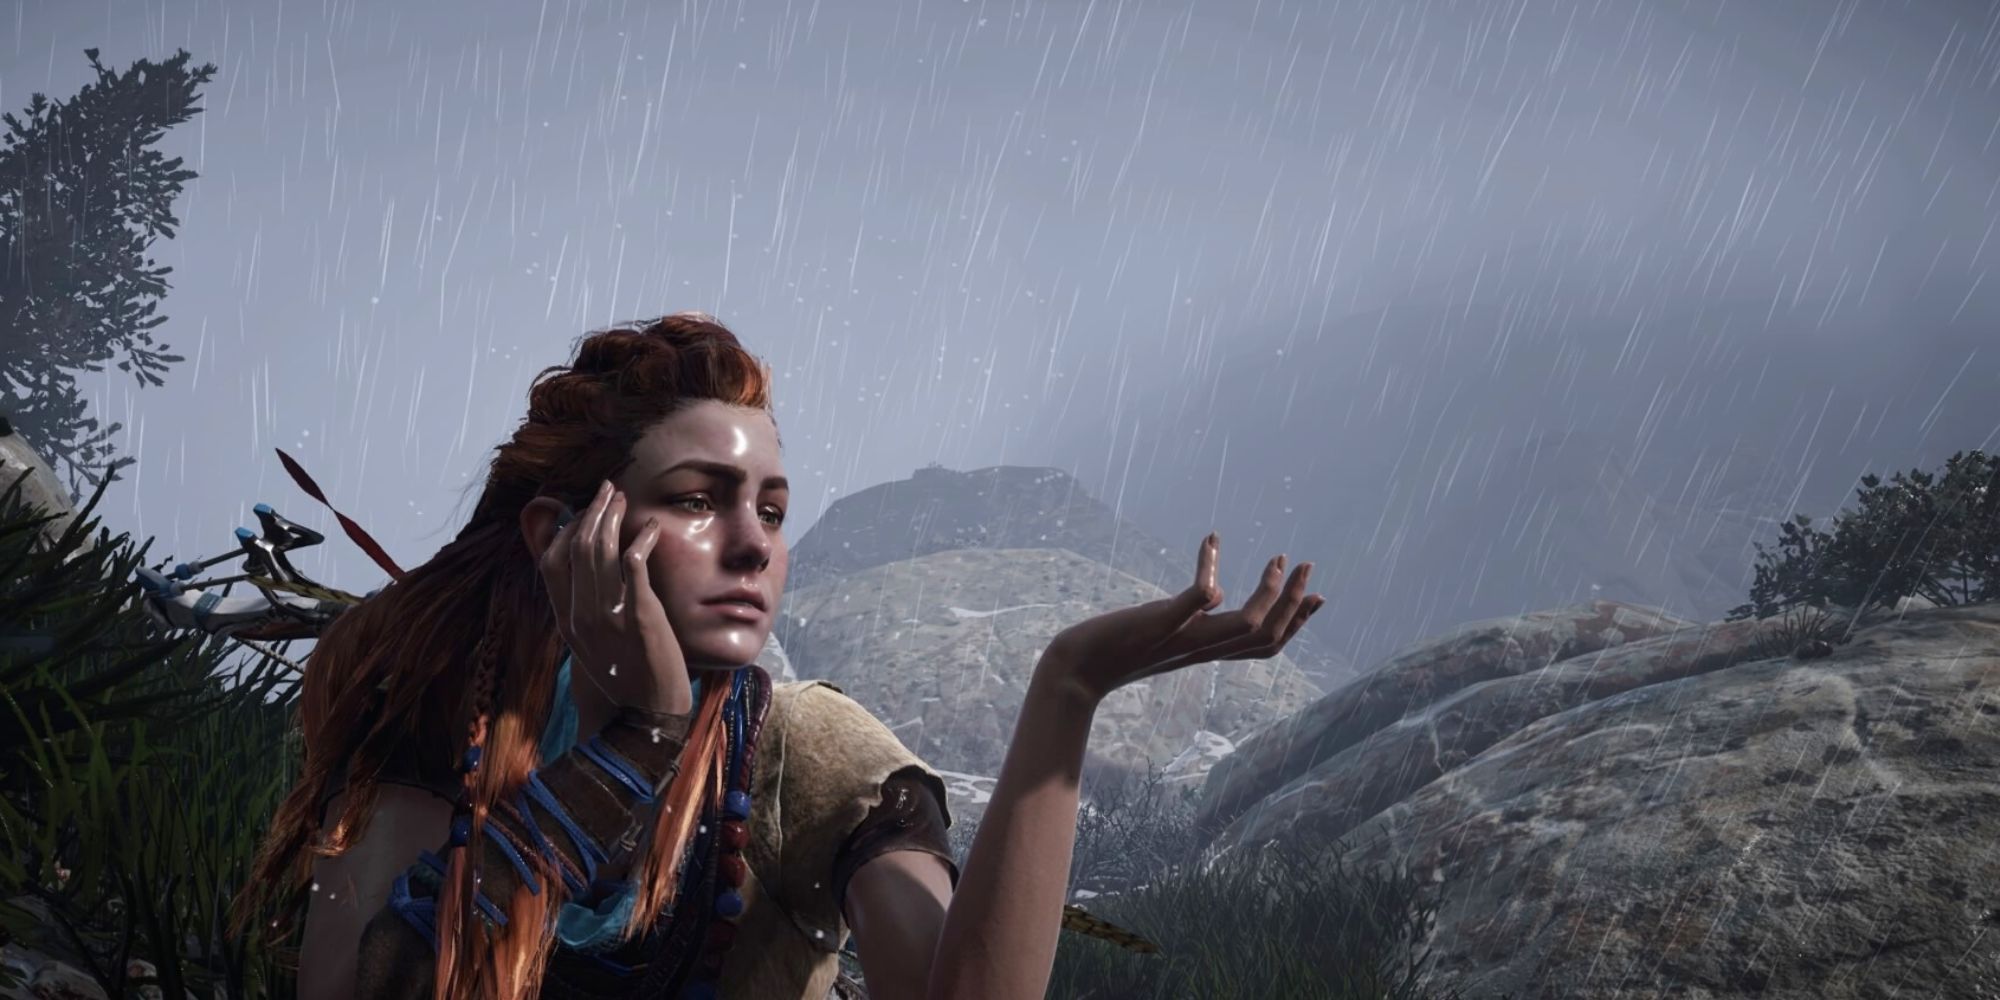 Aloy sits in the rain outside and catches droplets in her hand